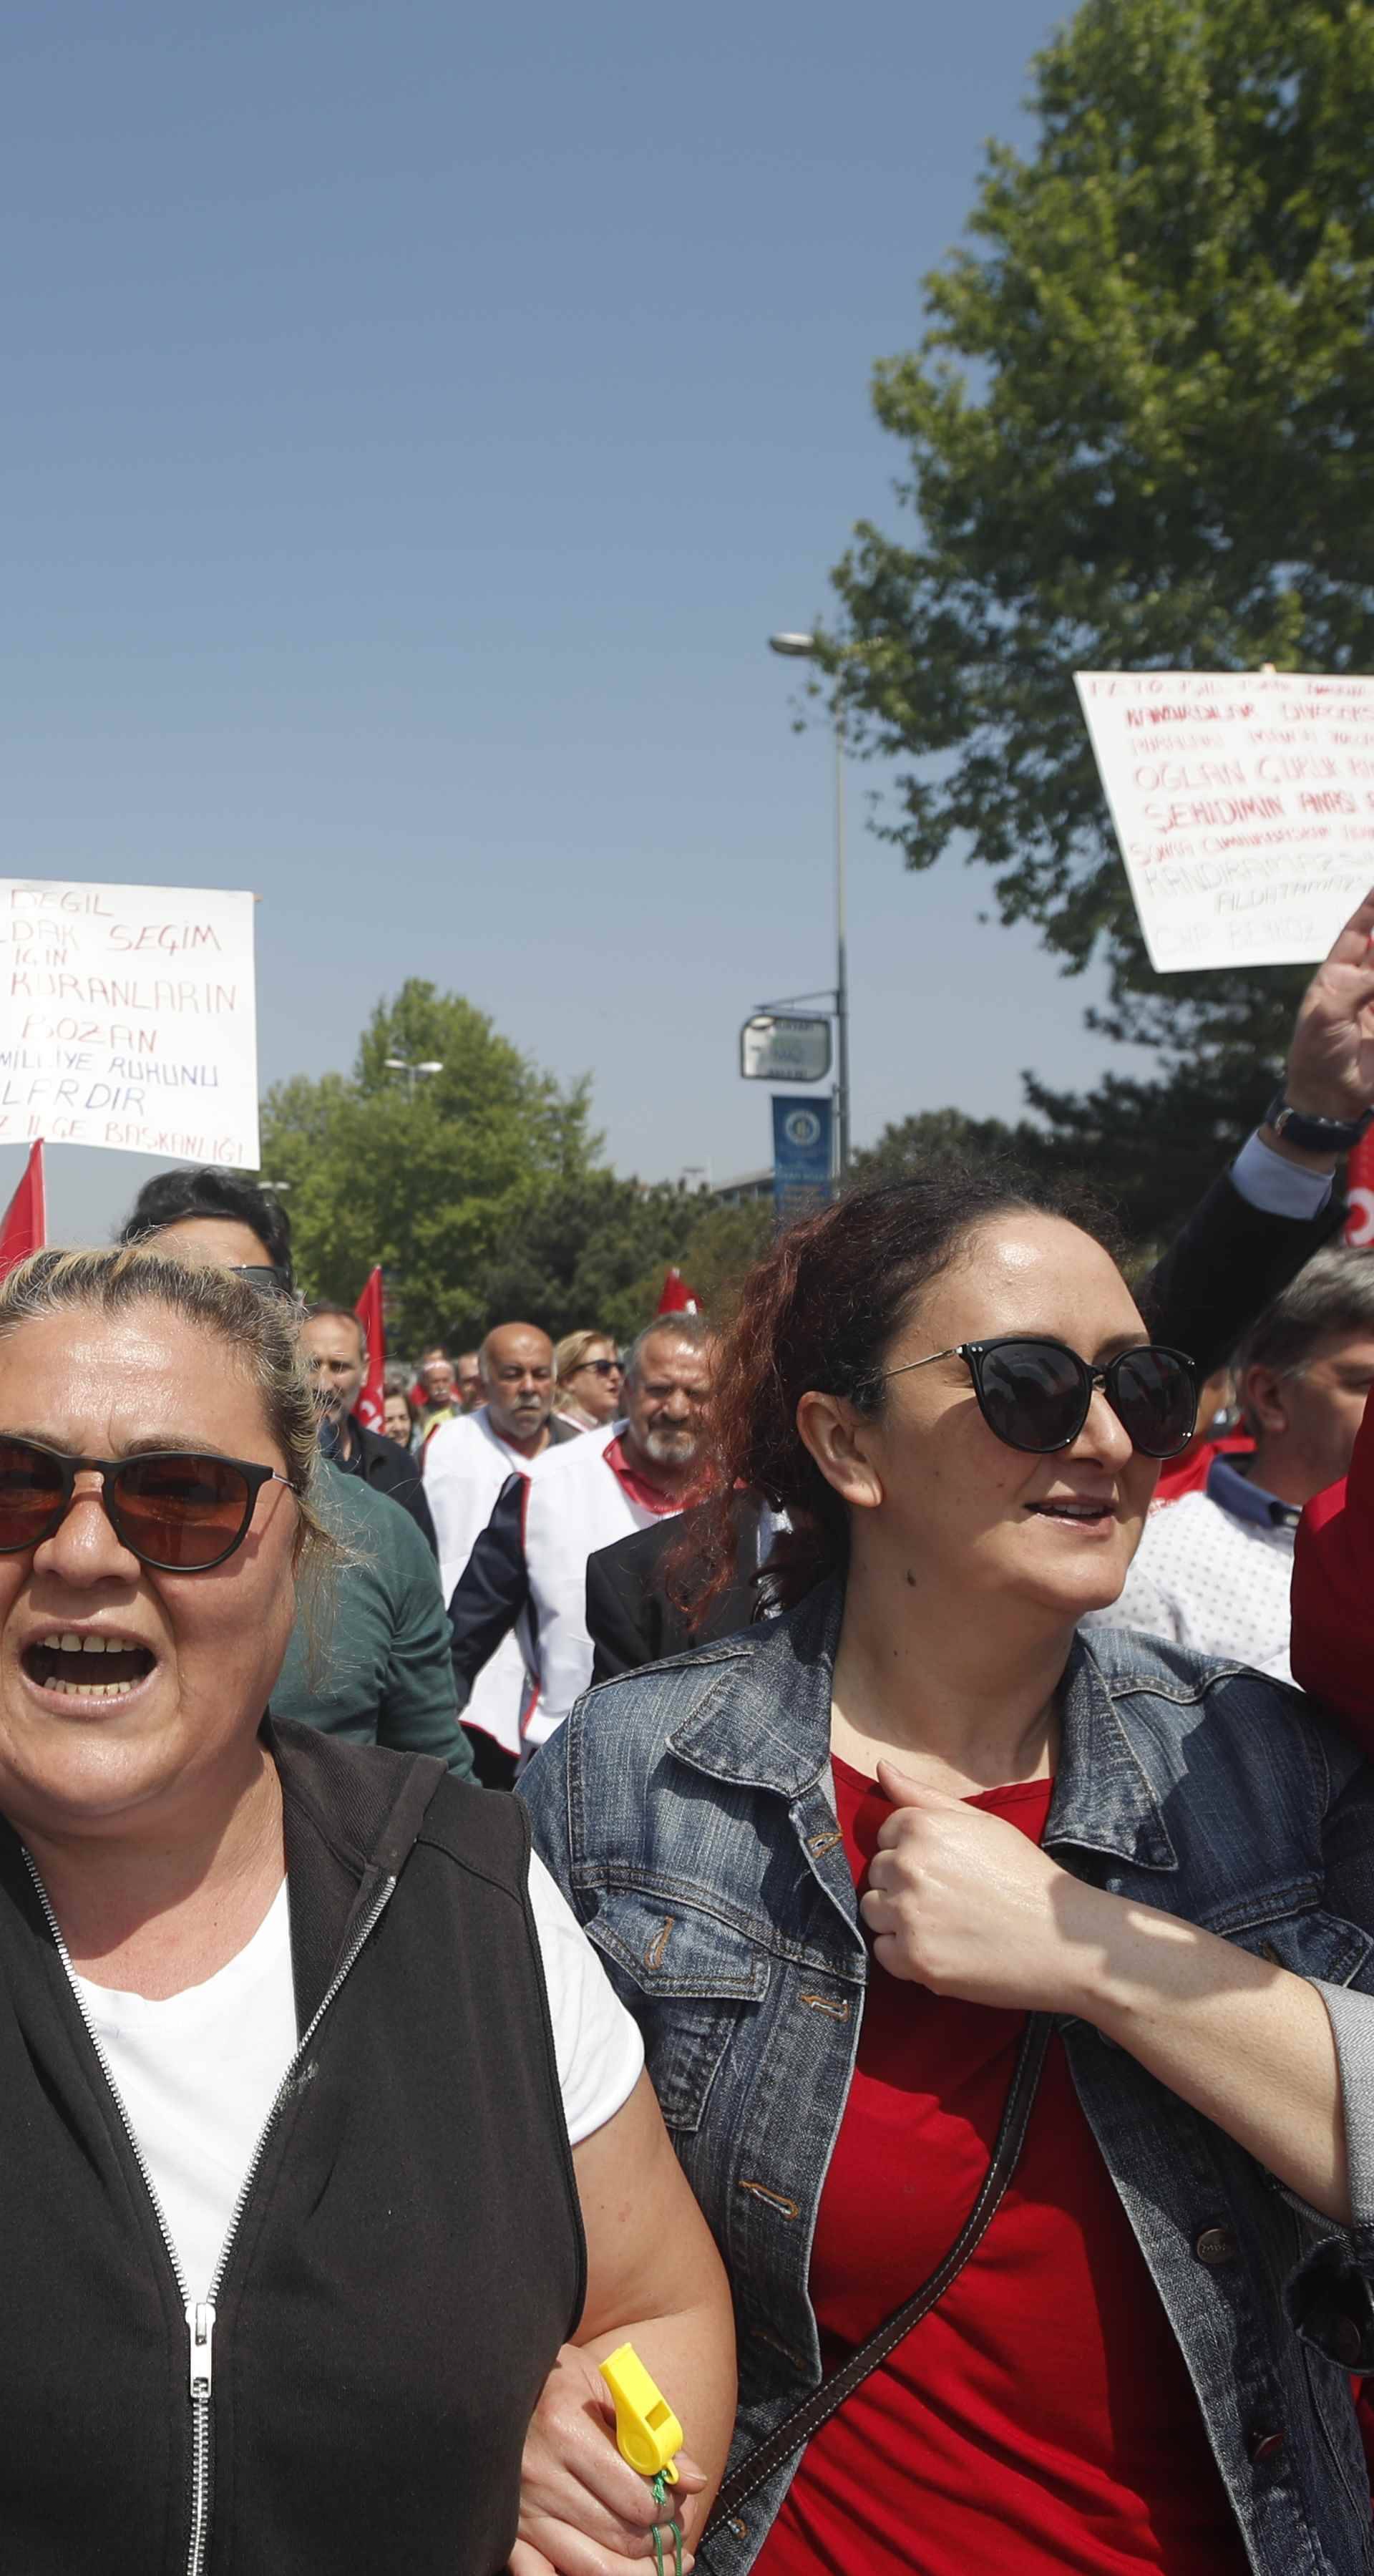 Supporters of the main opposition CHP shout slogans during a May Day rally in Istanbul